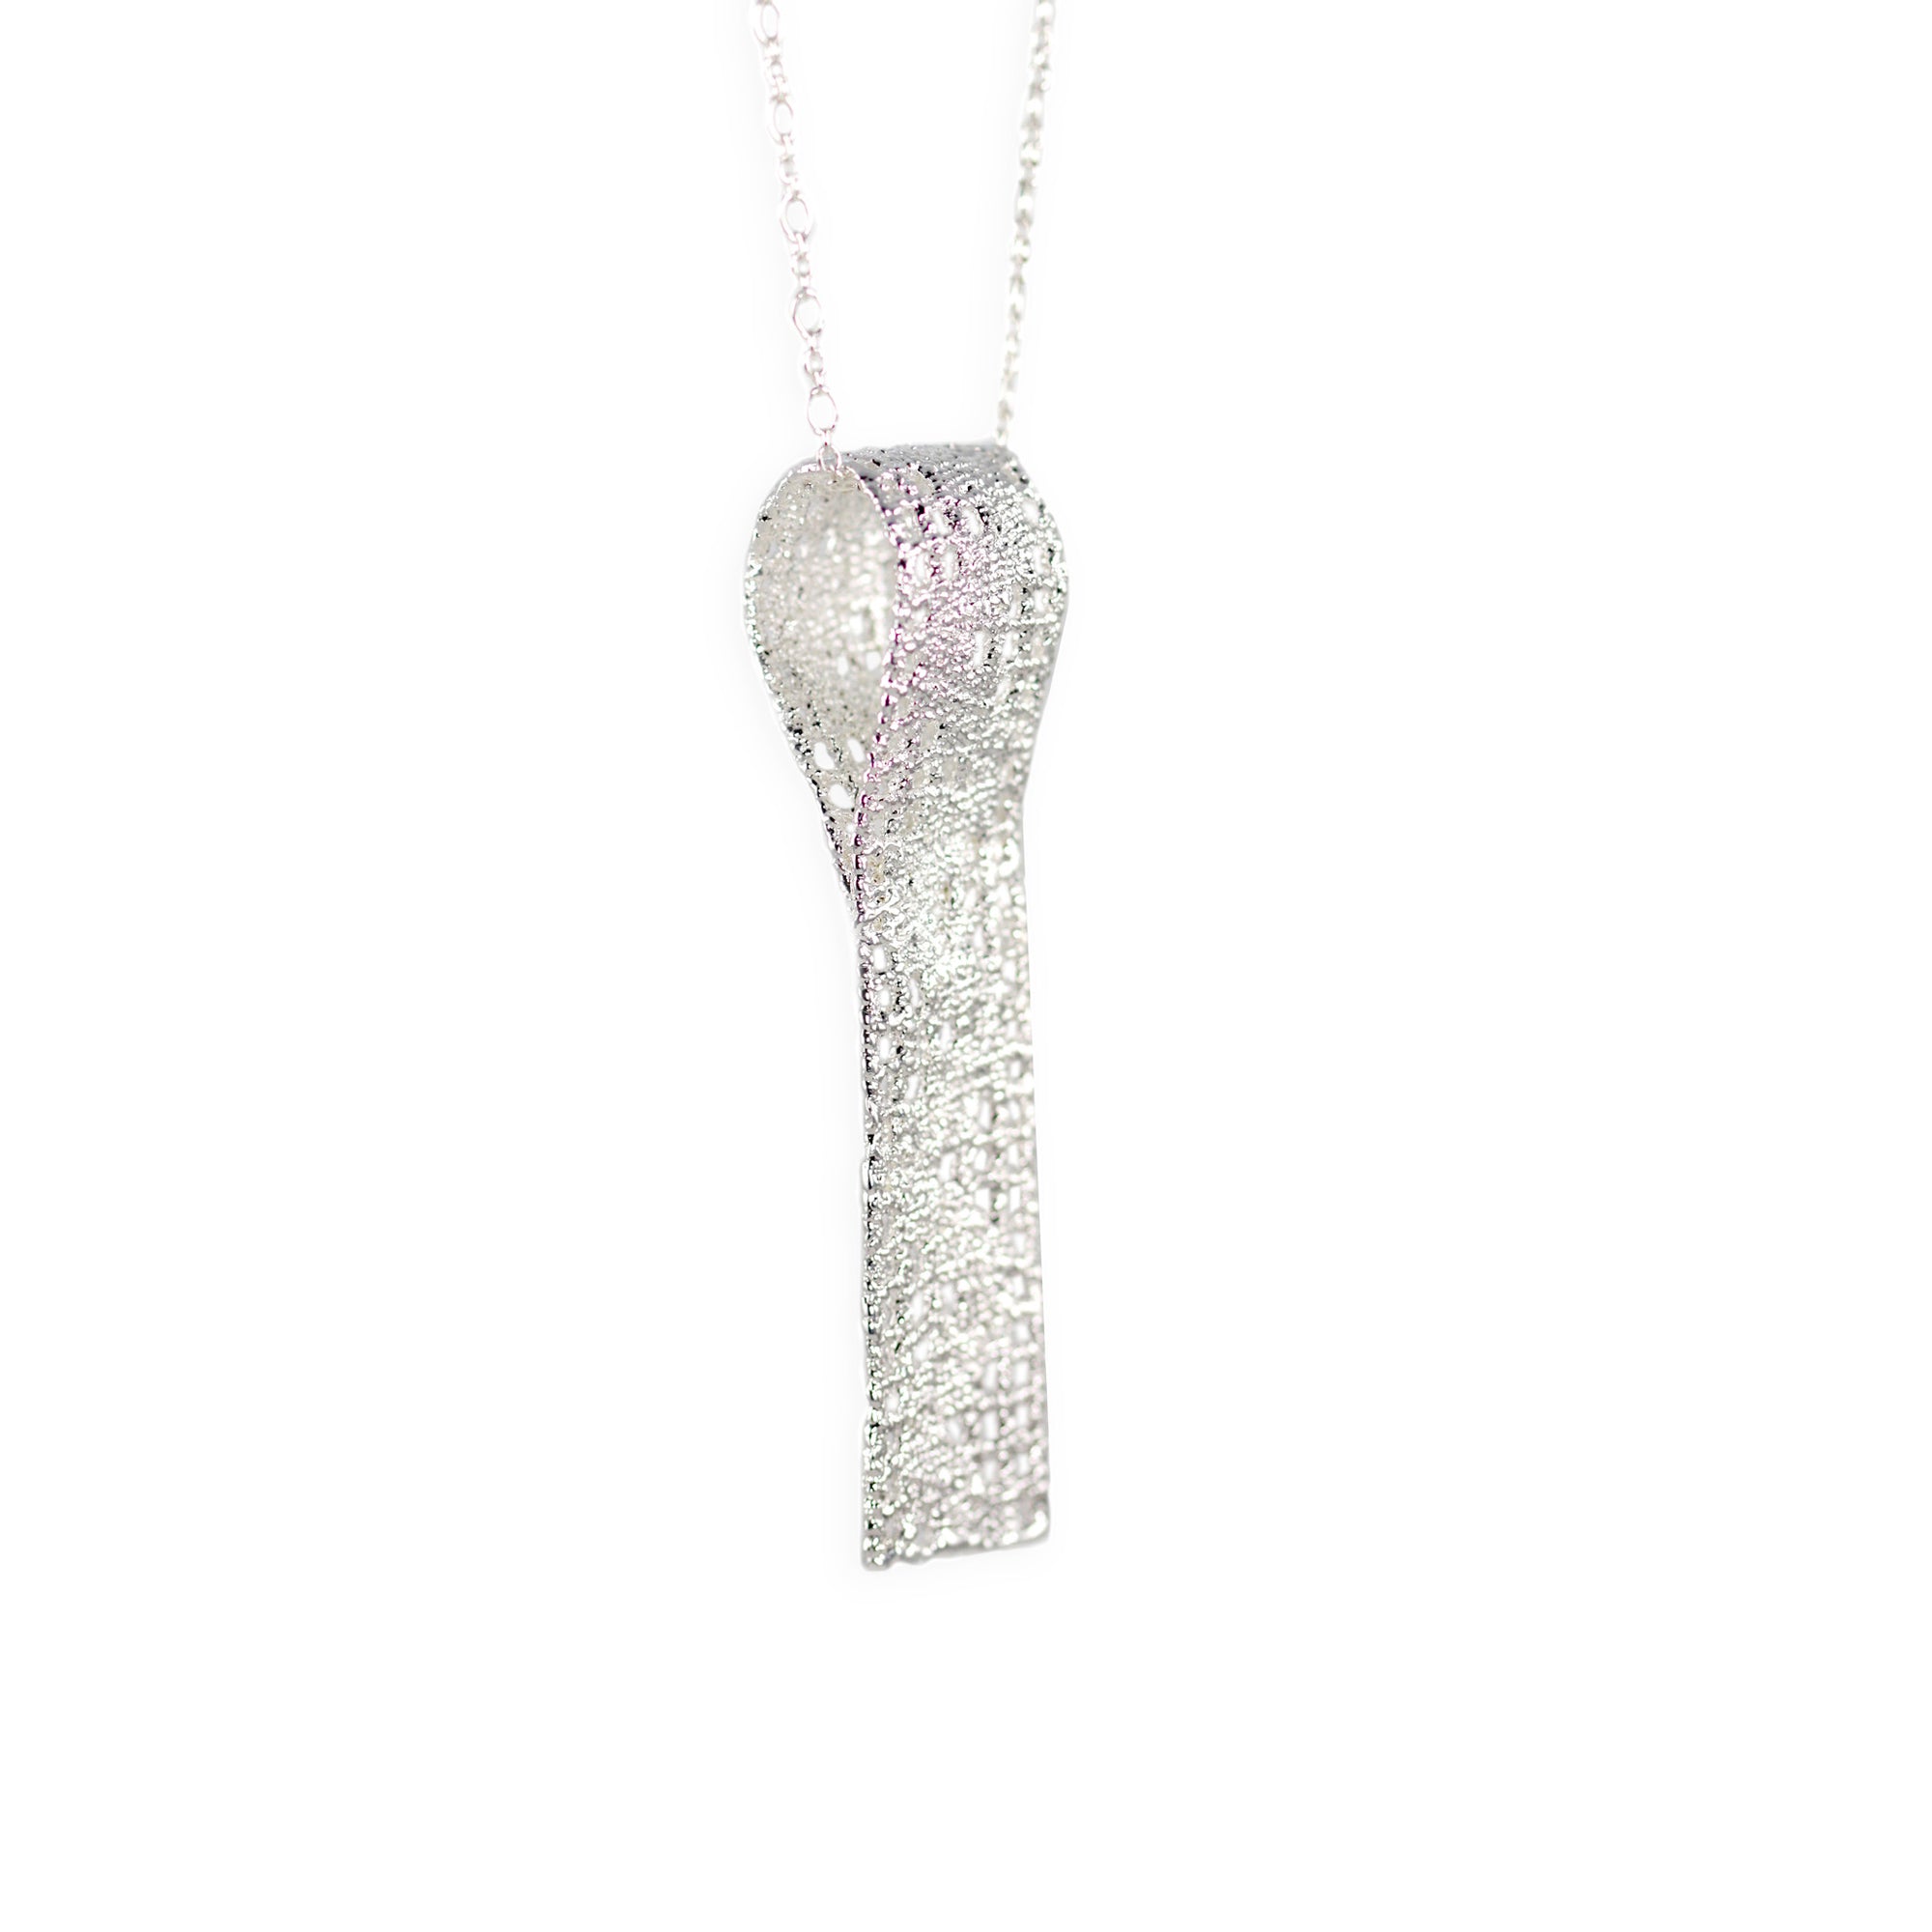 Lace pendant necklace solidified in sterling silver.